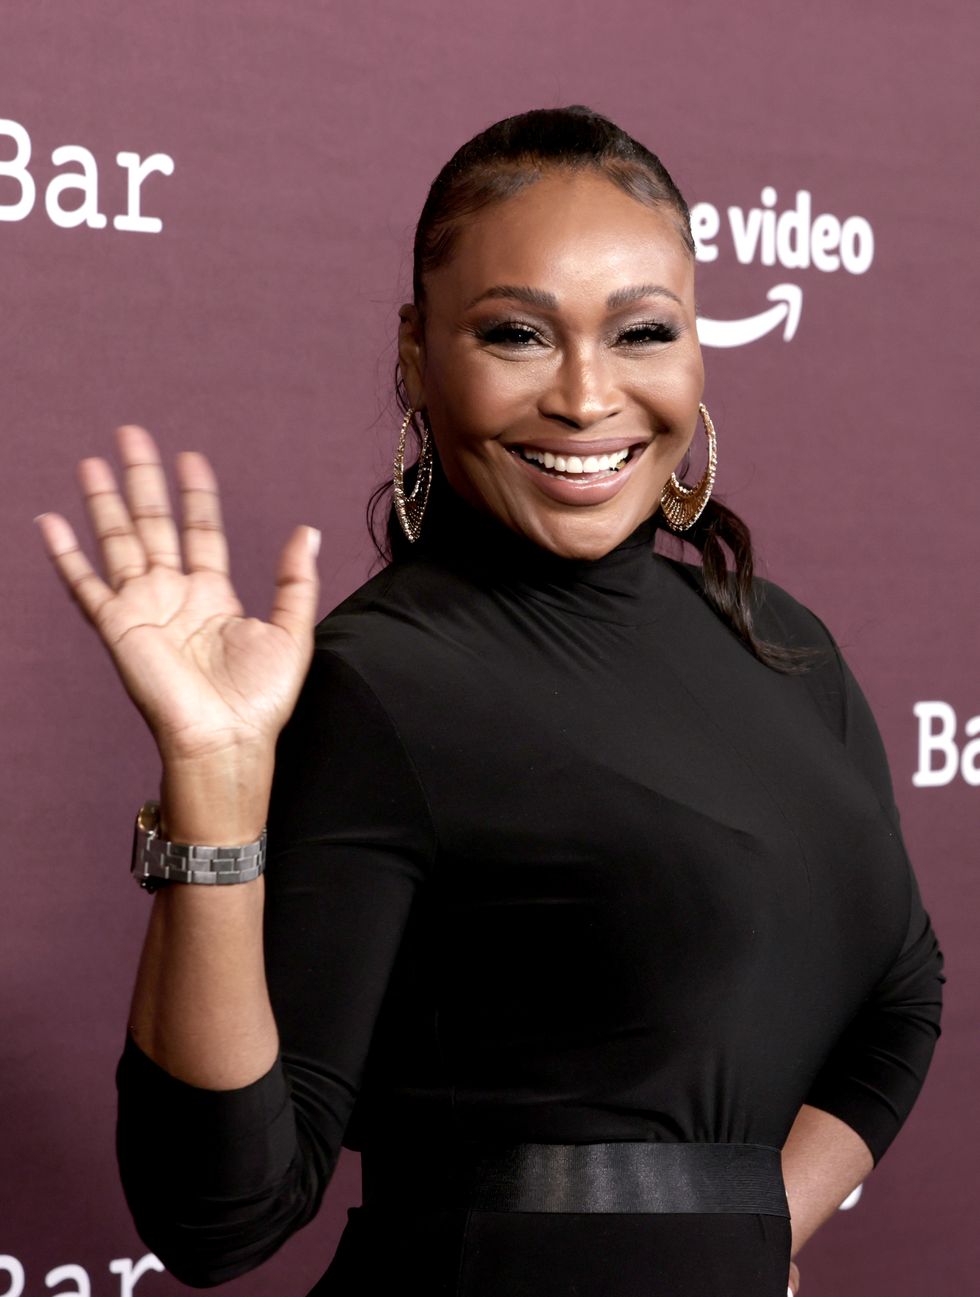 celebrity big brother 2022 cynthia bailey amazon studios presents los angeles premiere of "the tender bar" arrivals